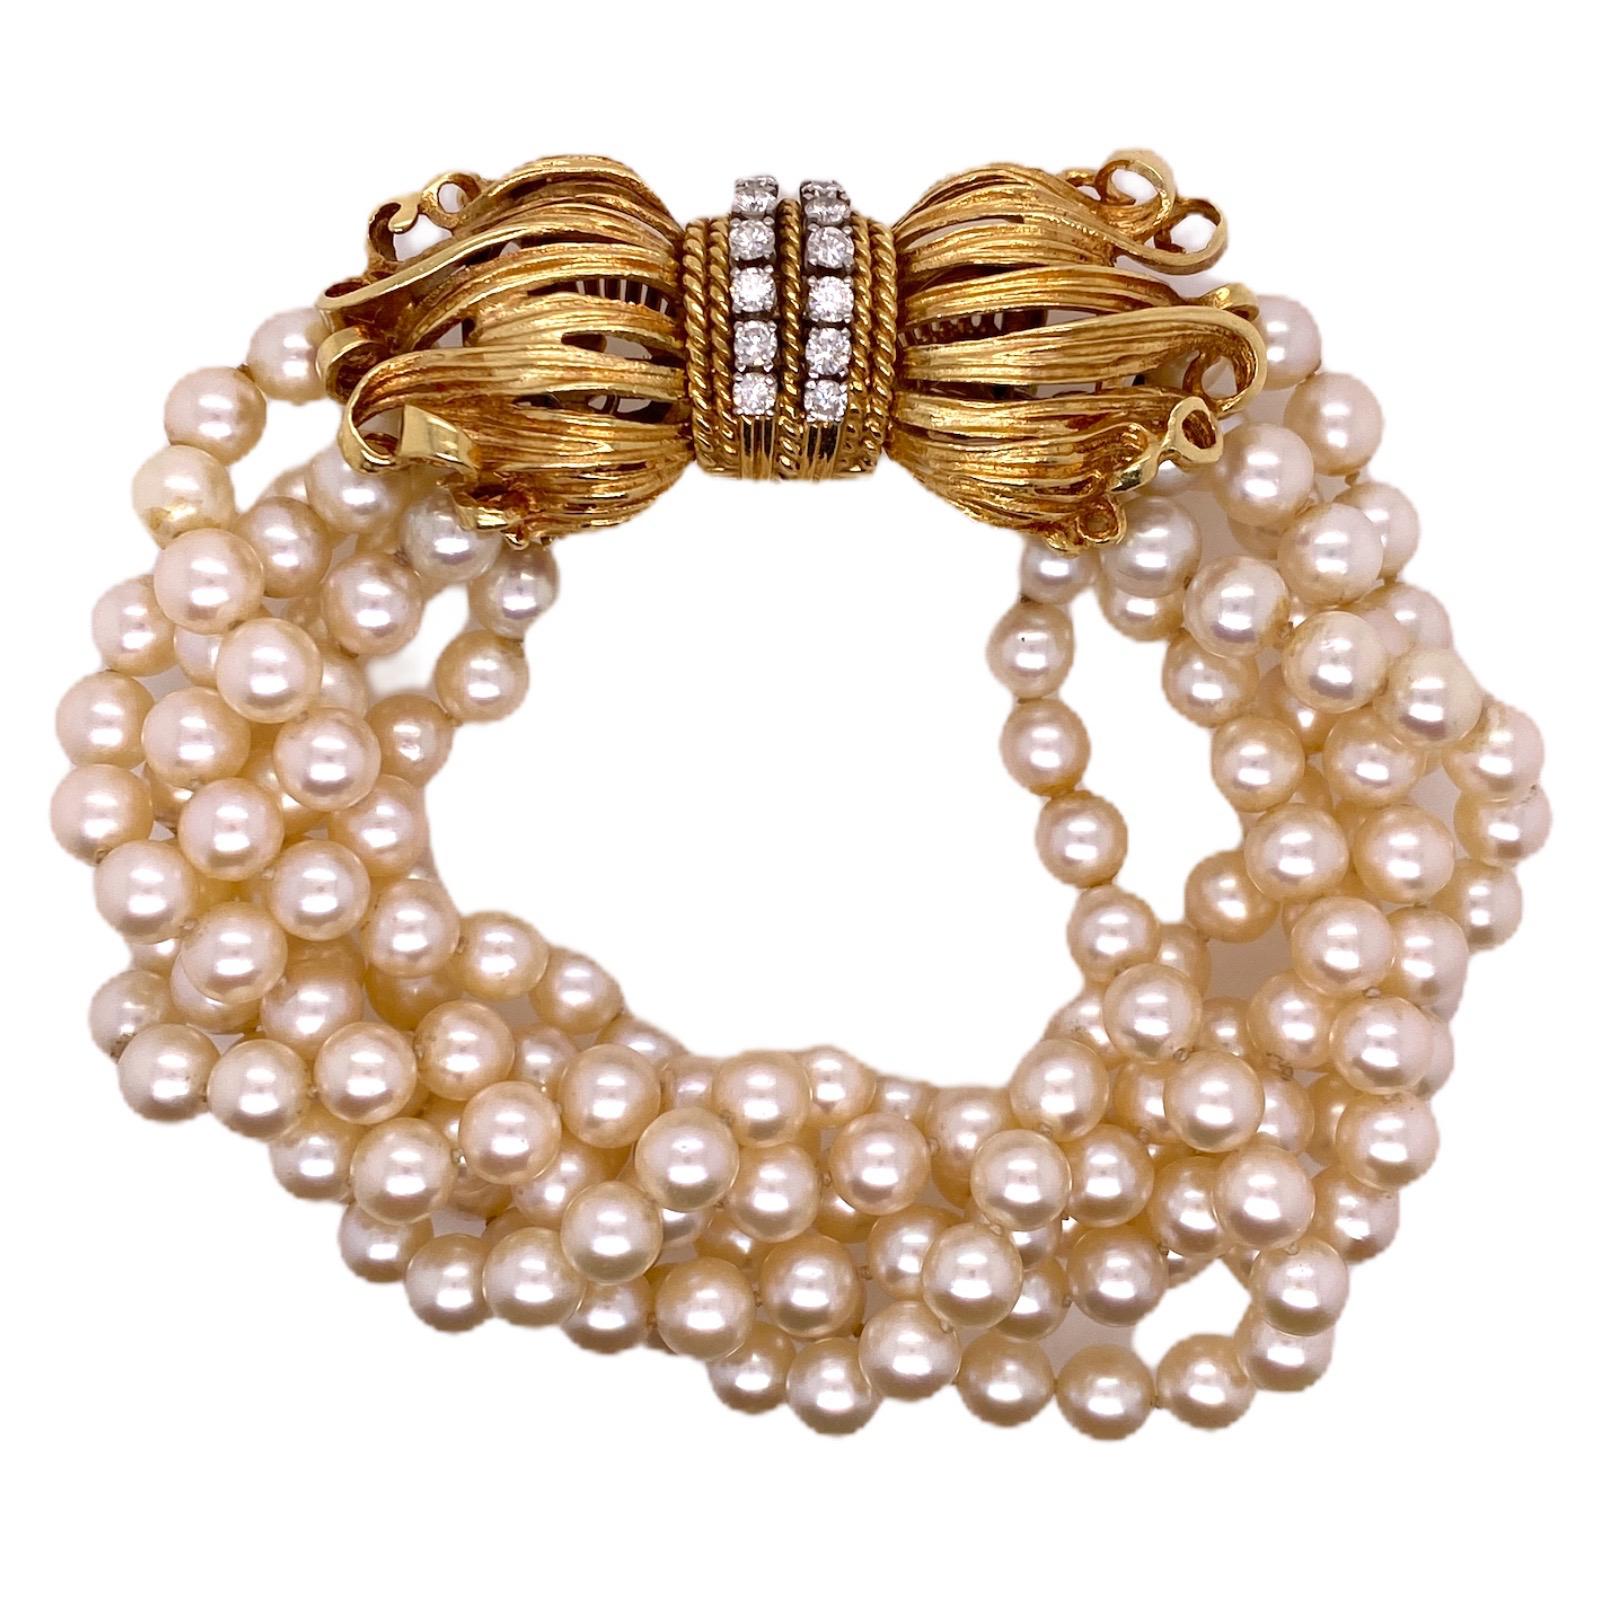 Stunning cultured pearl bracelet crafted with a diamond and 18 karat yellow gold bow shape clasp. The 6 strands of beautifully matched pearls measure 5.5-6.0 mm each, and the clasp features 14 round brilliant cut diamonds weighing 1.00 carat total